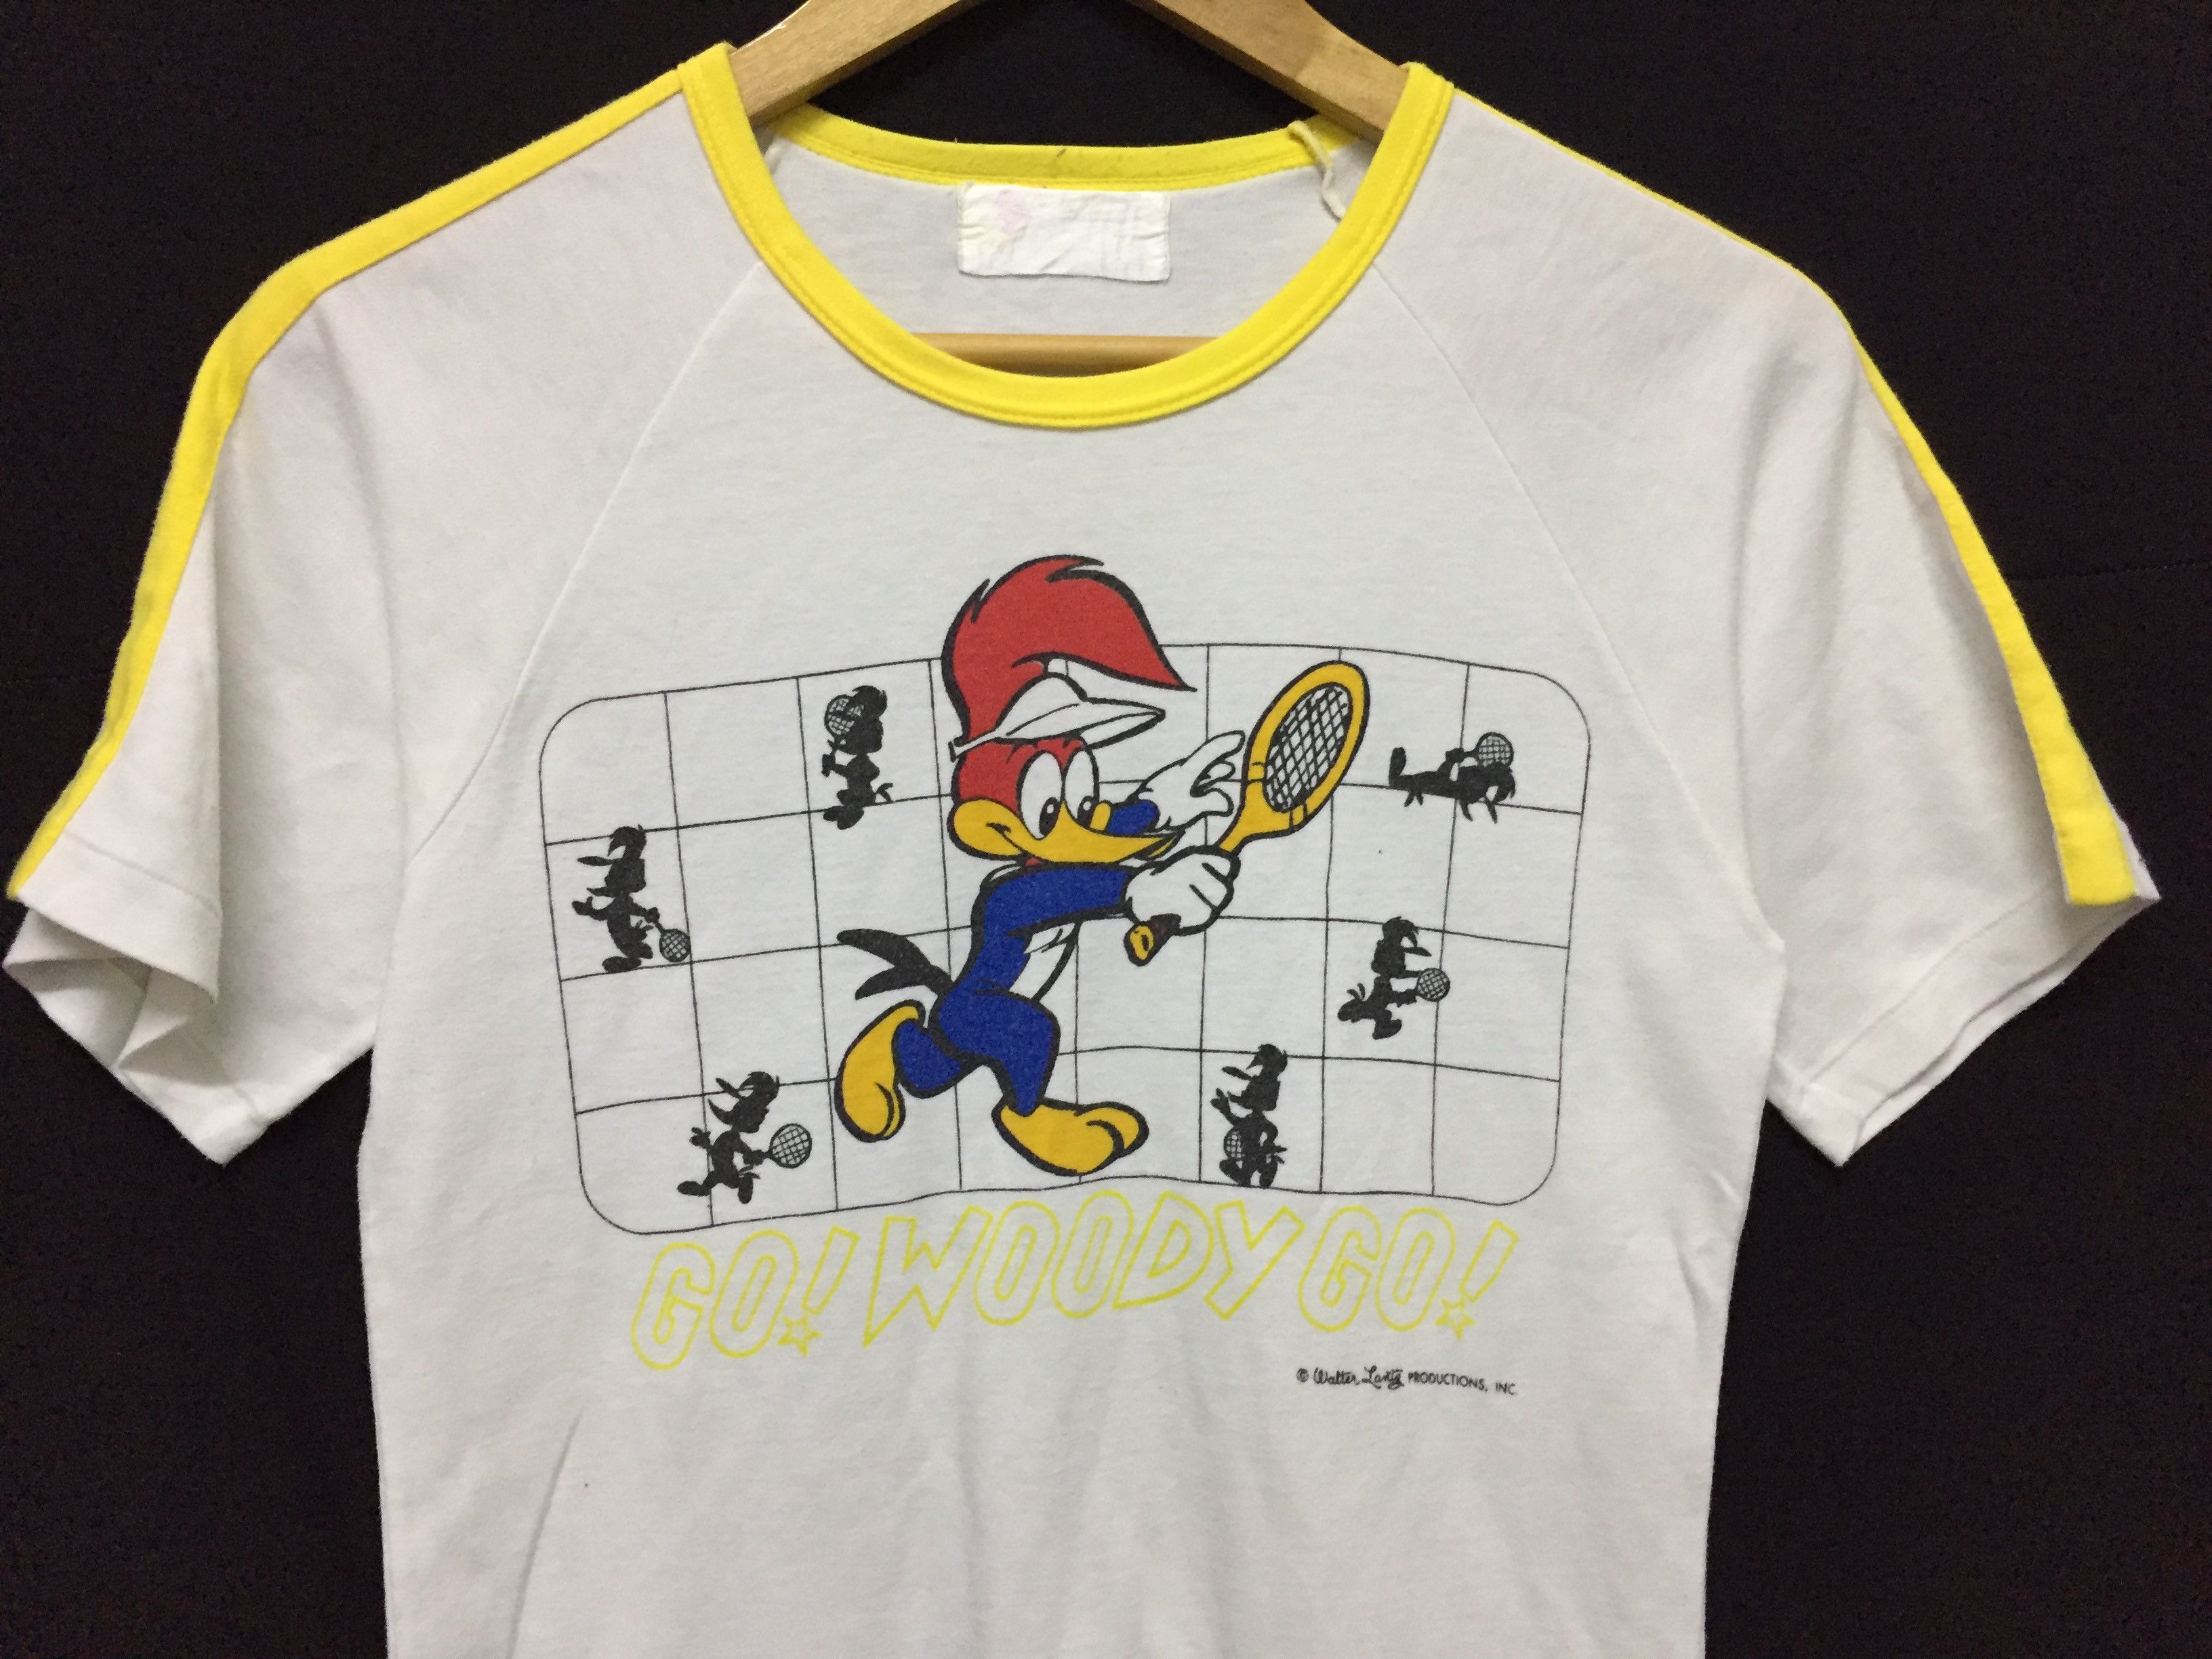 Vintage 80's Woody Woodpecker shirt Size US XS / EU 42 / 0 - 2 Preview